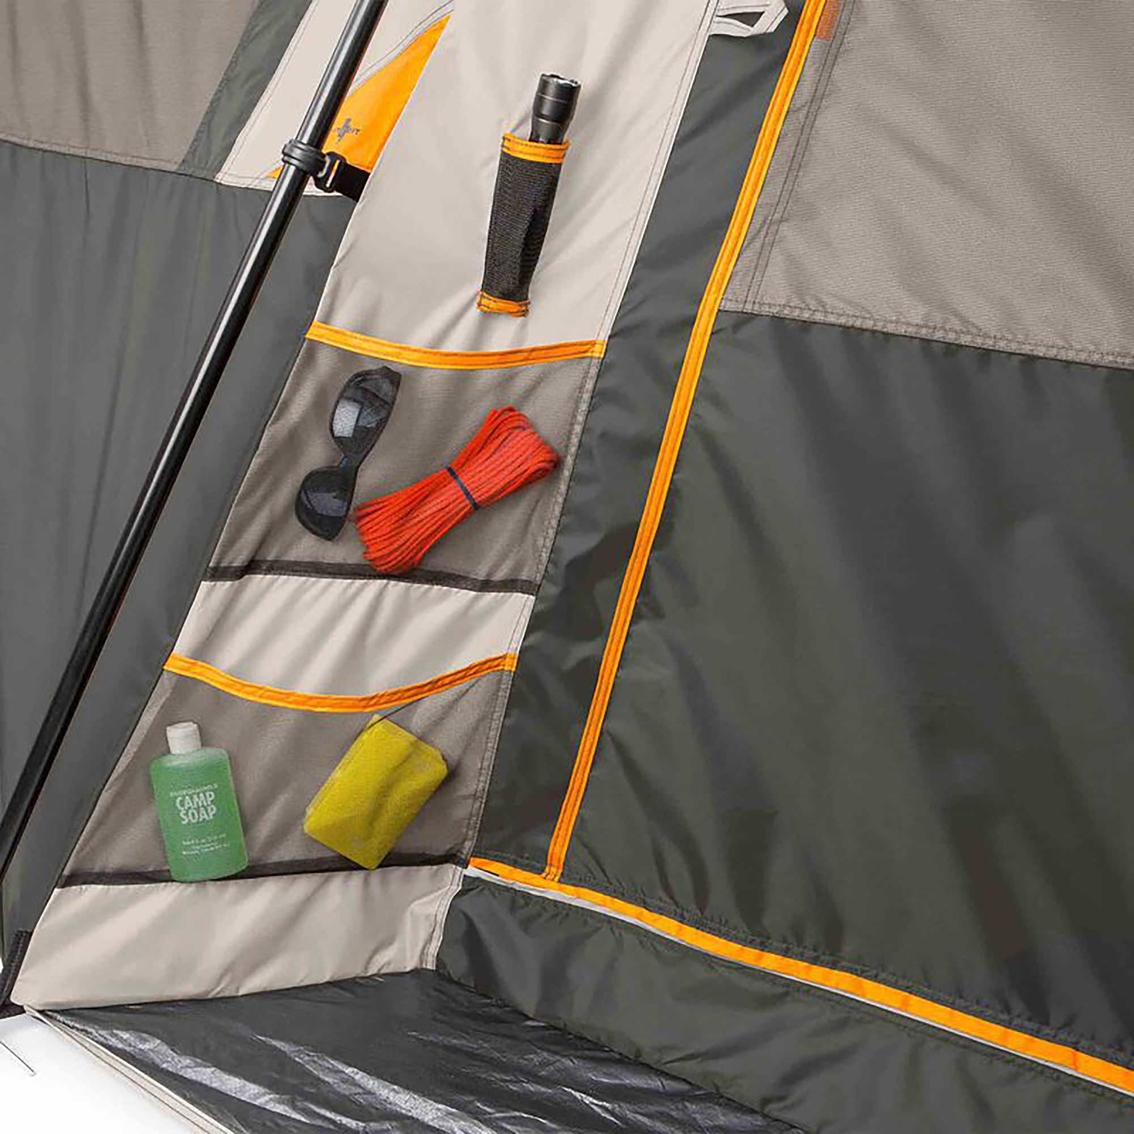 Bushnell 12P Outdoorsman Instant Cabin Tent - Image 10 of 10